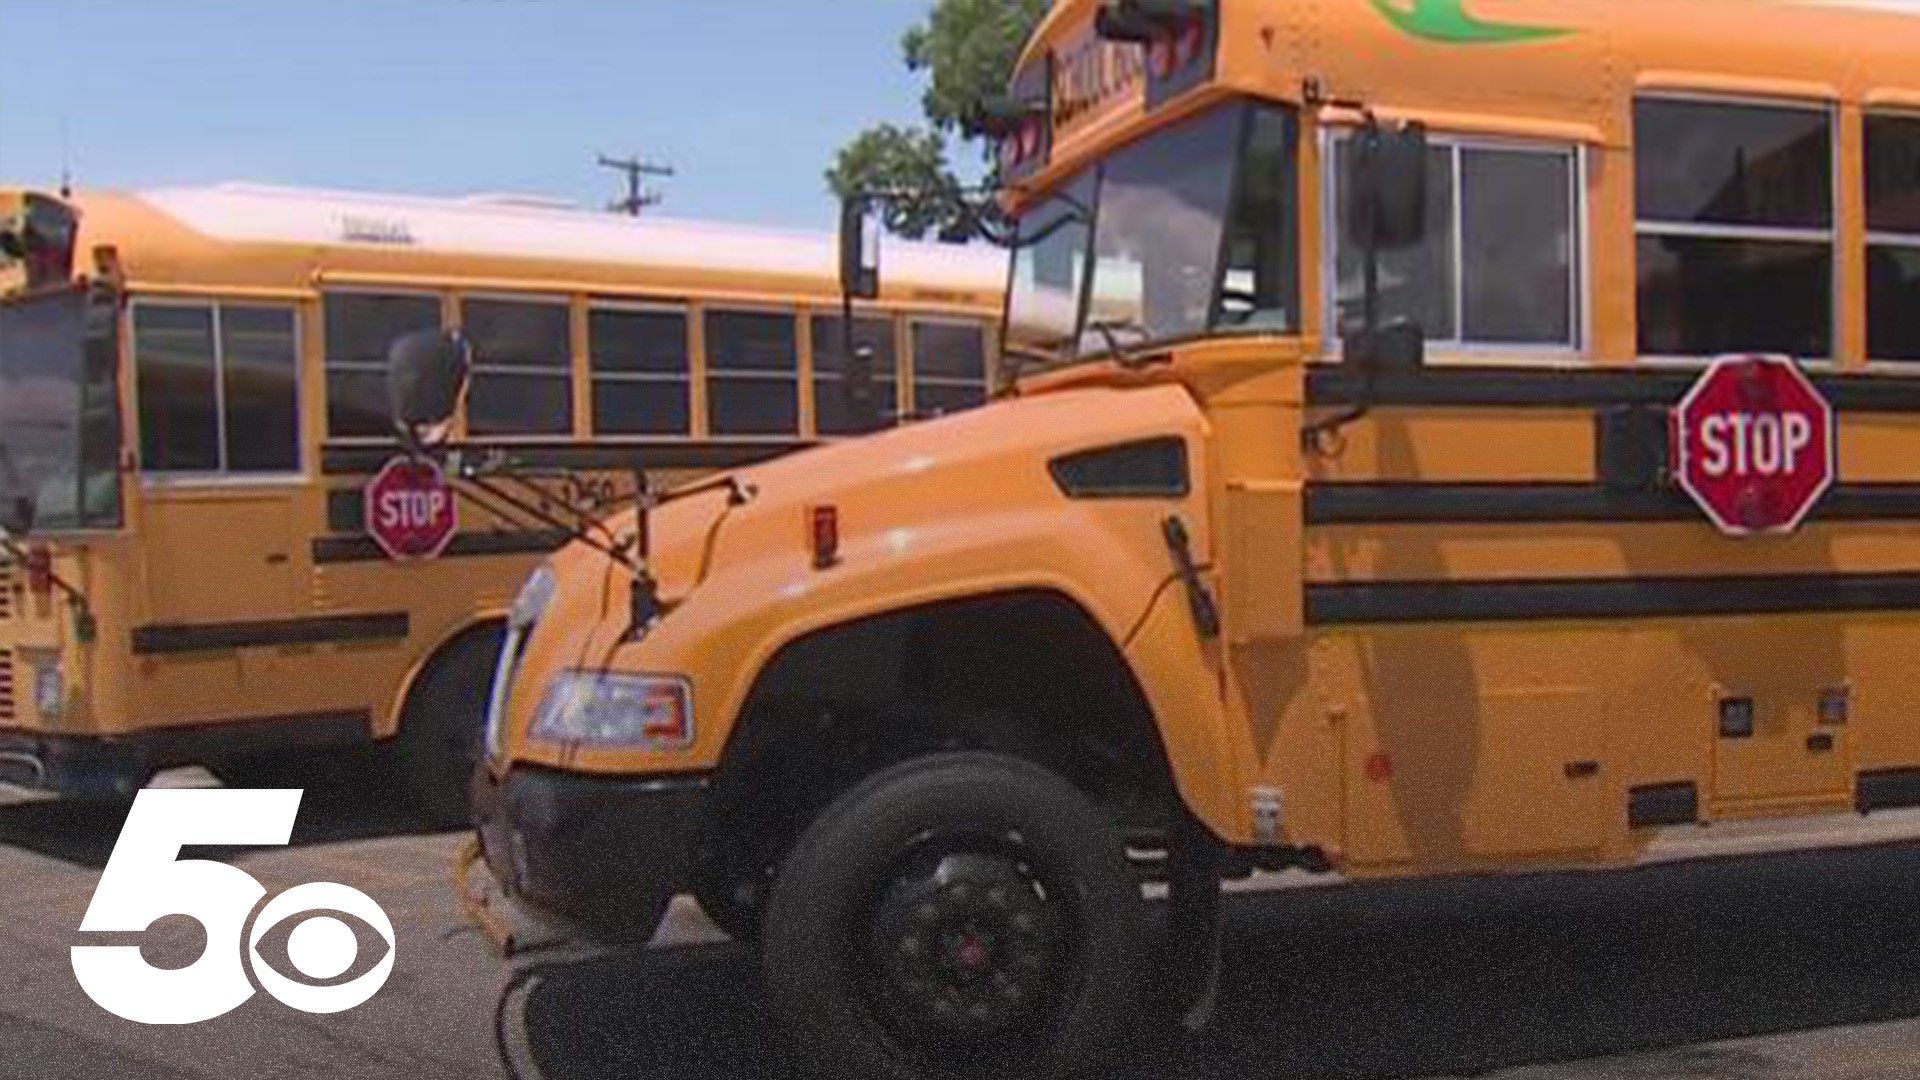 Fort Smith is looking to make a positive impact on the environment by using propane-powered school buses.